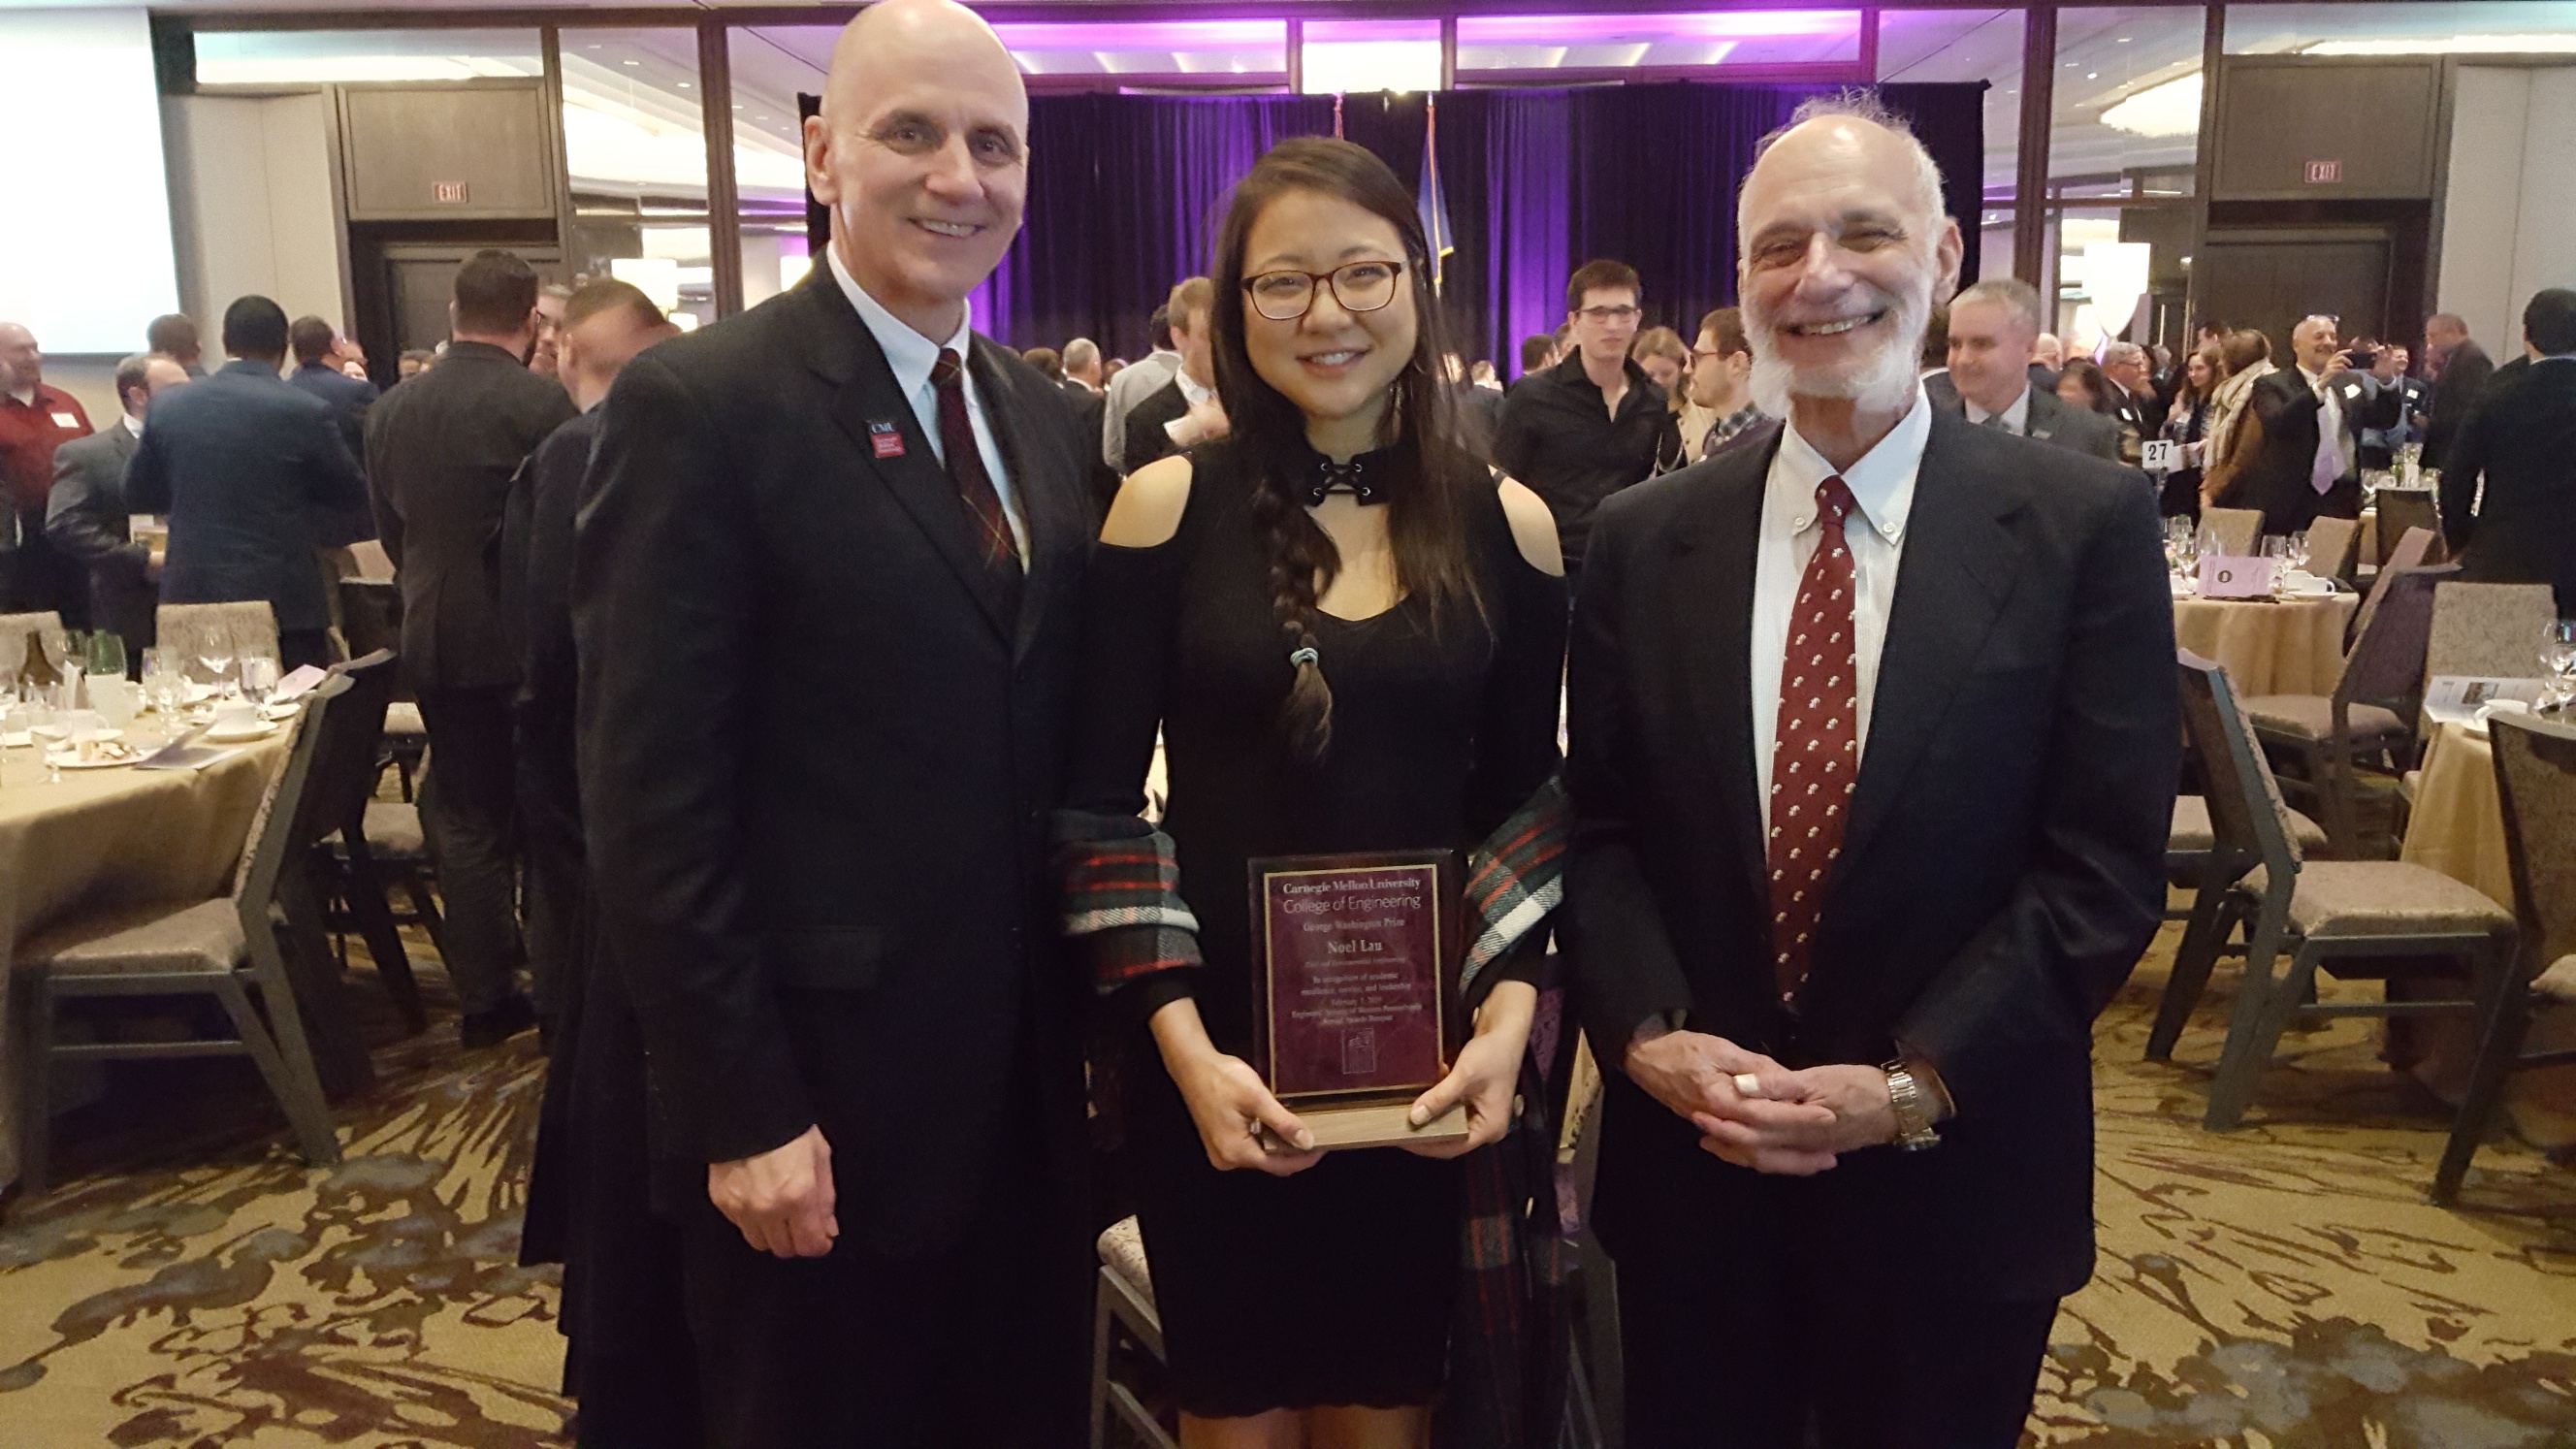 Nicole Lau with Dave Dzombak and Irving Oppenheim